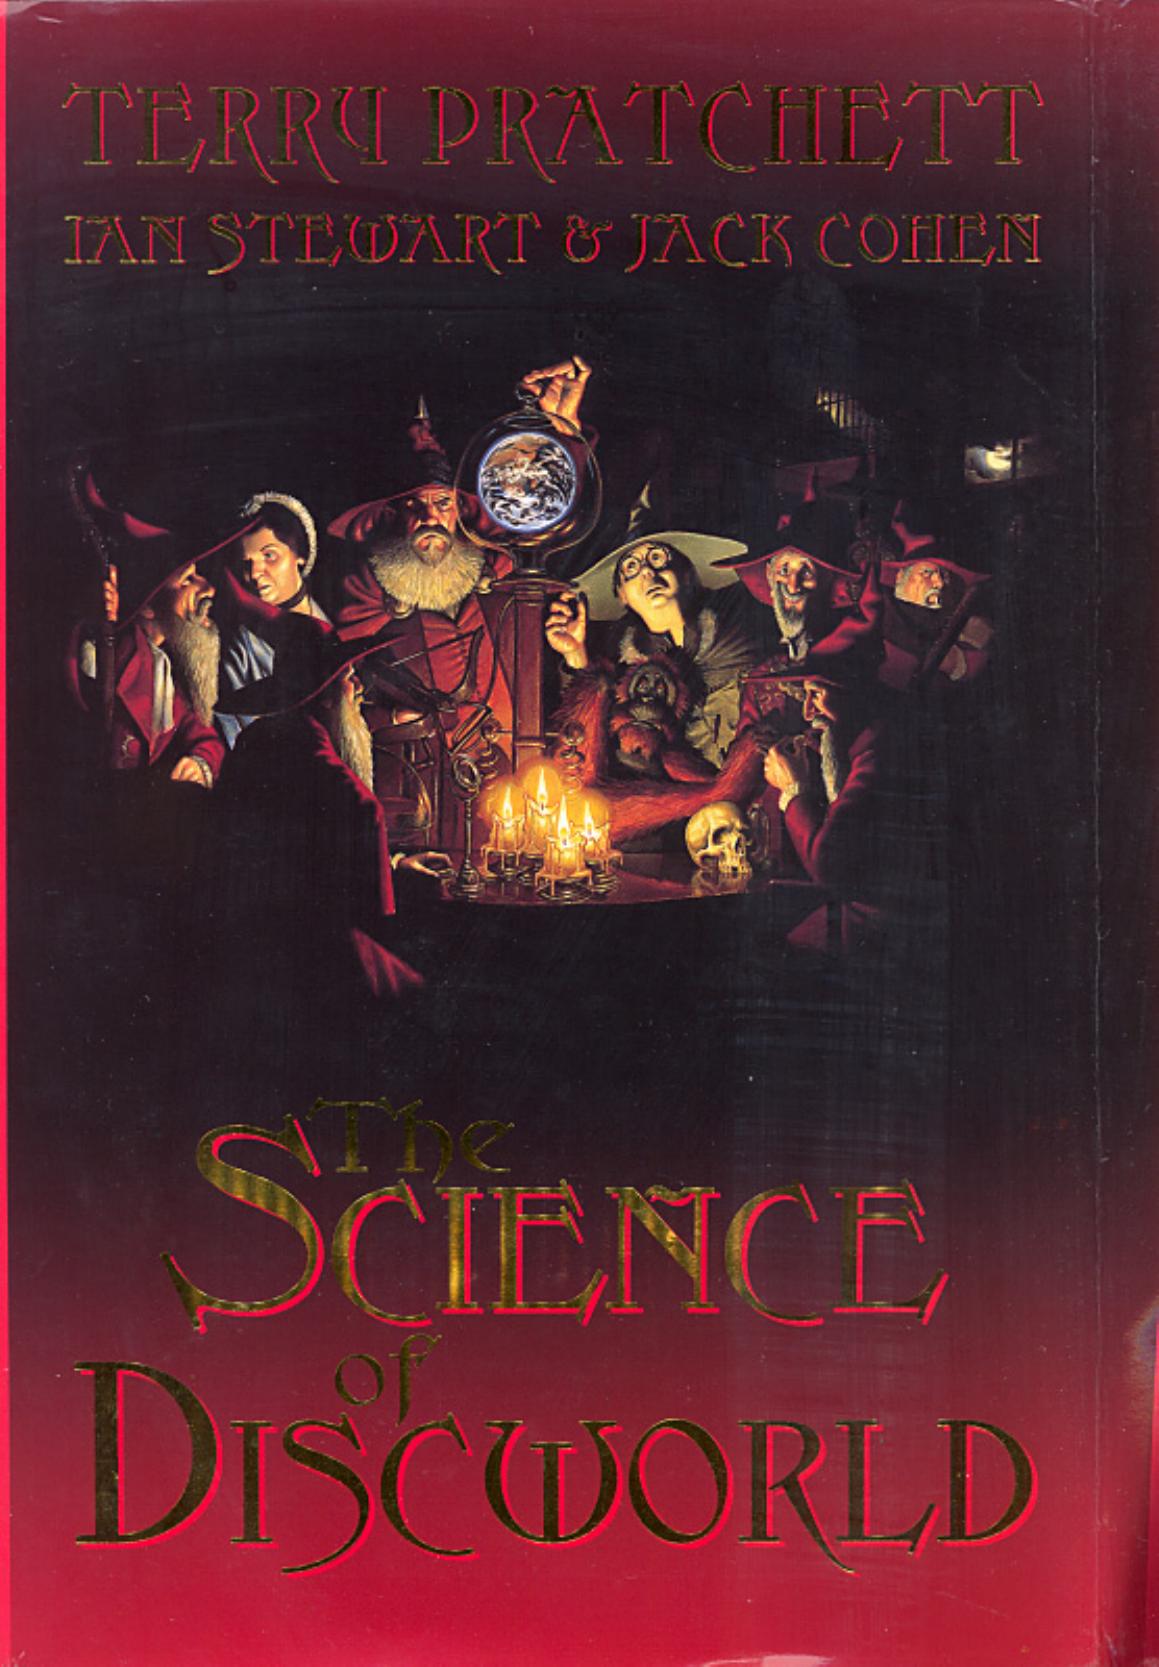 The Science of Discworld by Terry Pratchett